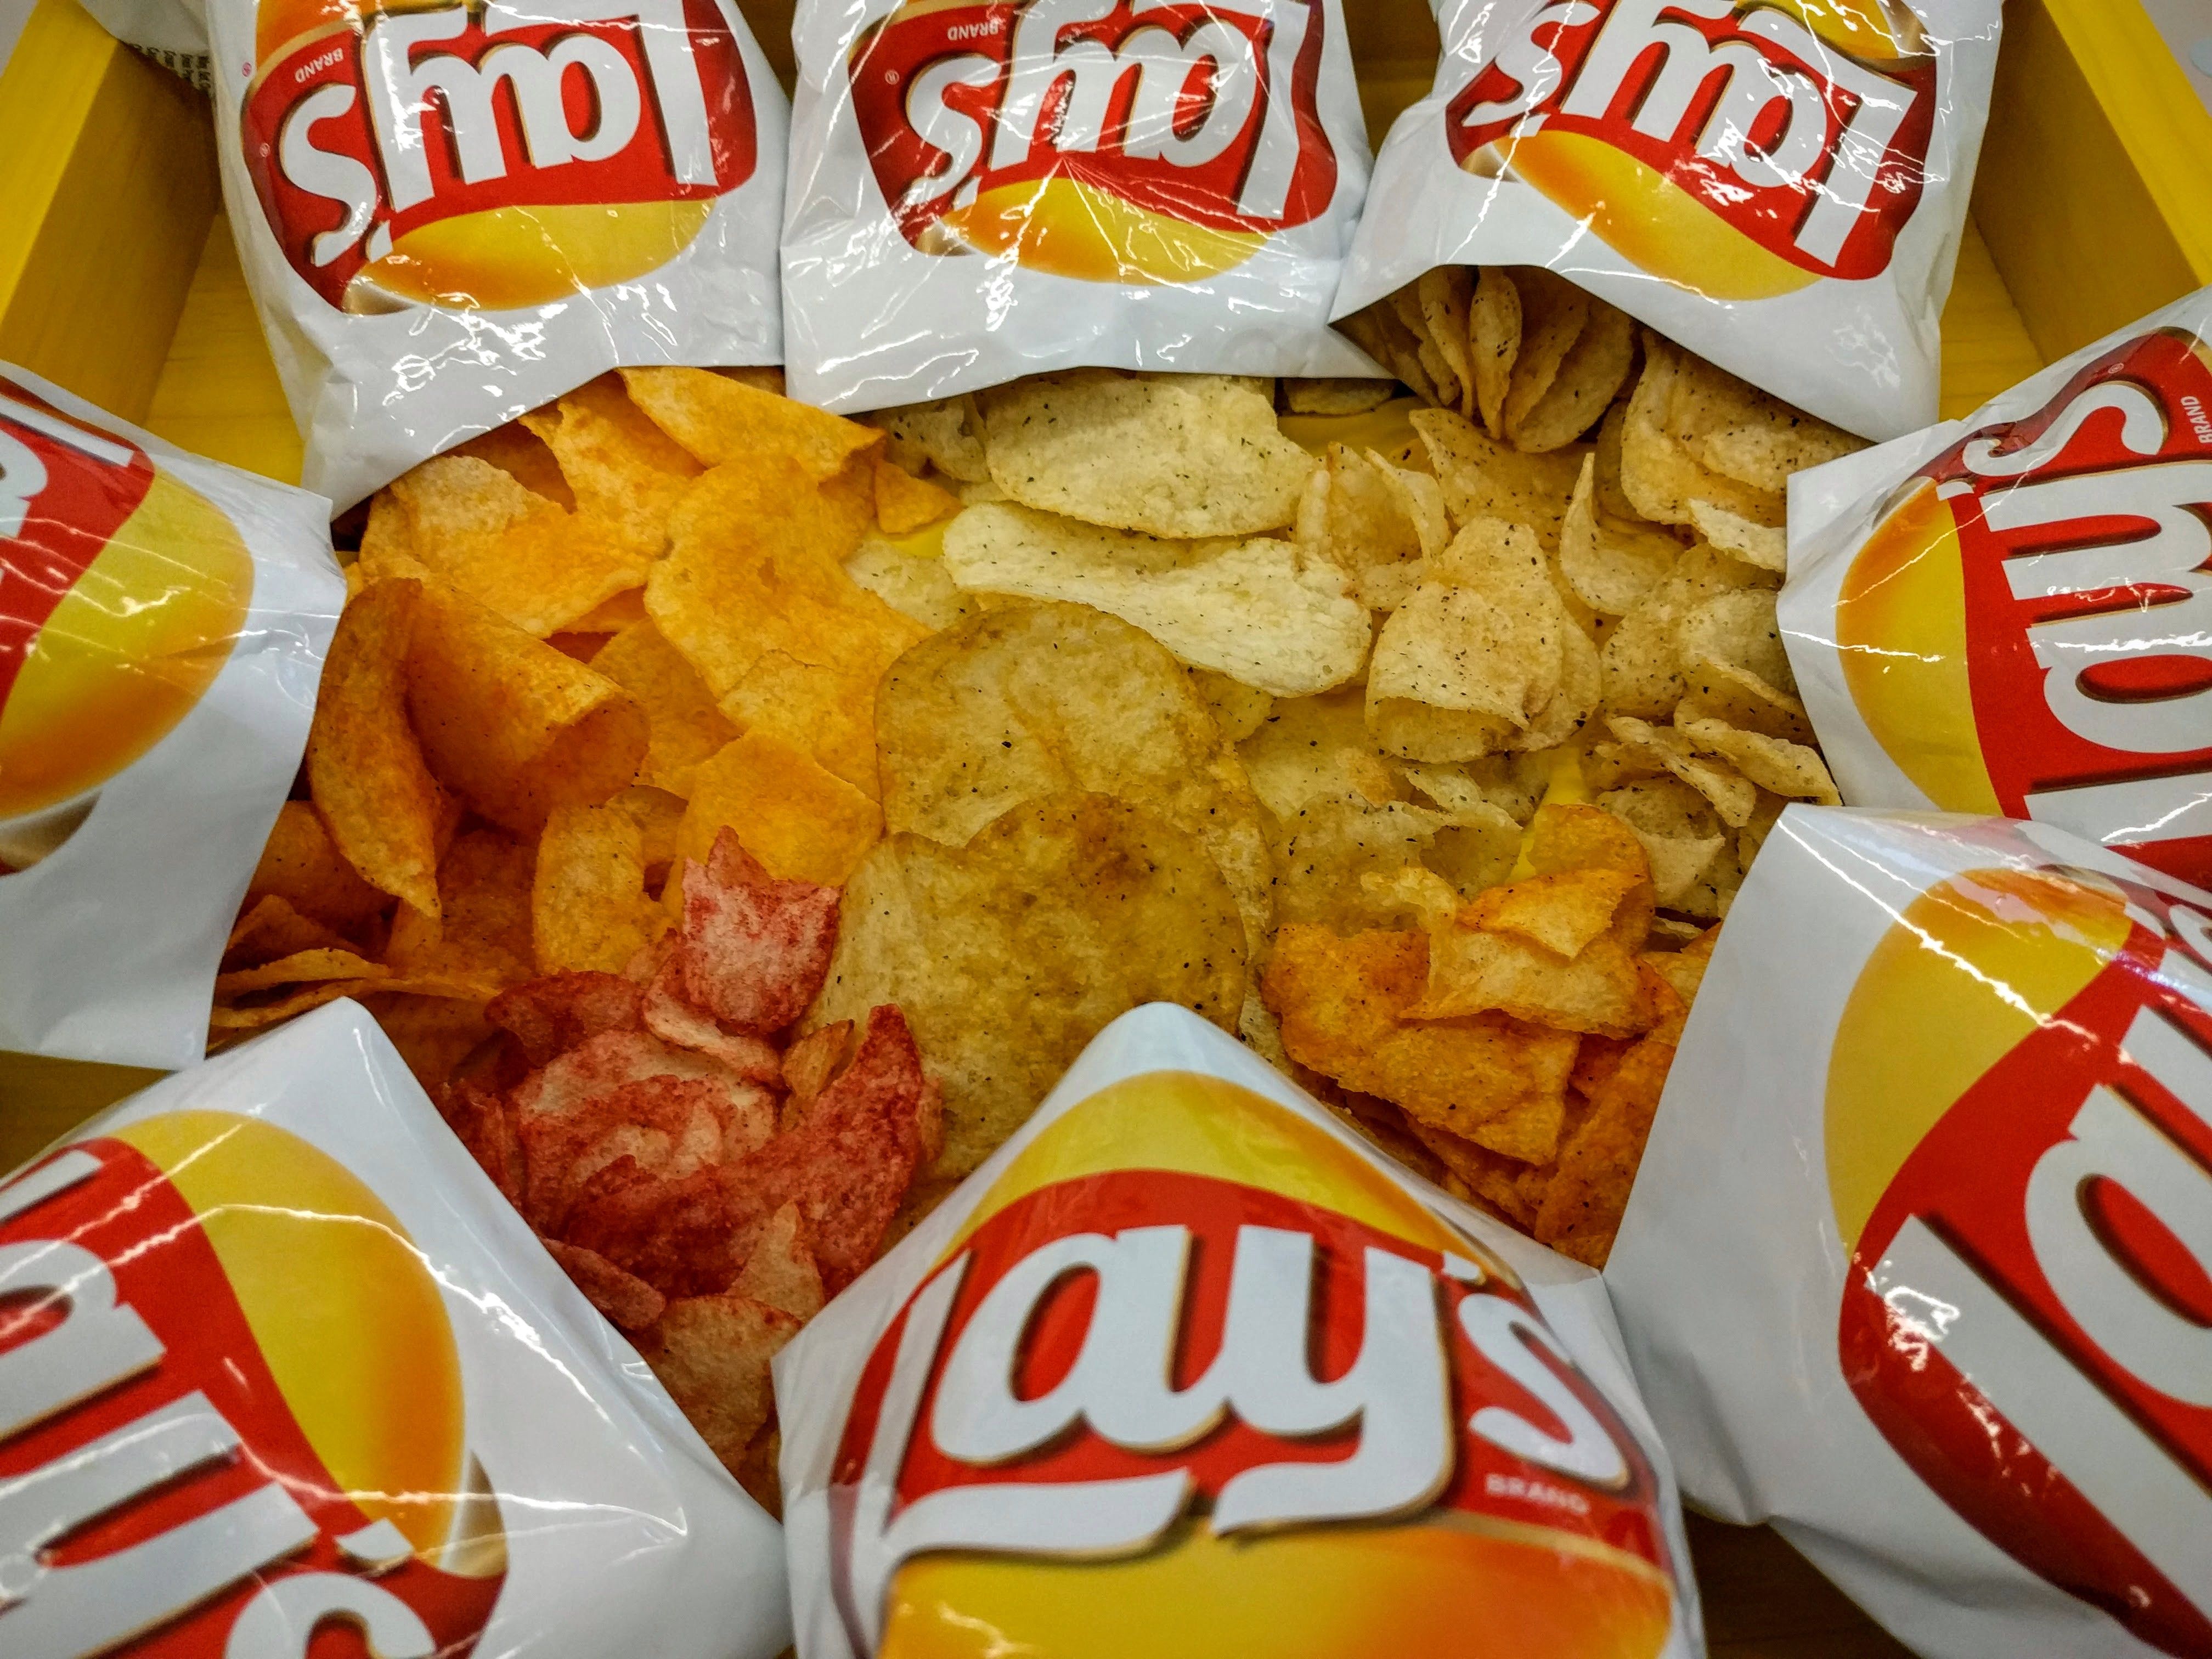 Fans Are Suggesting Weird Flavors For The Lay's Contest